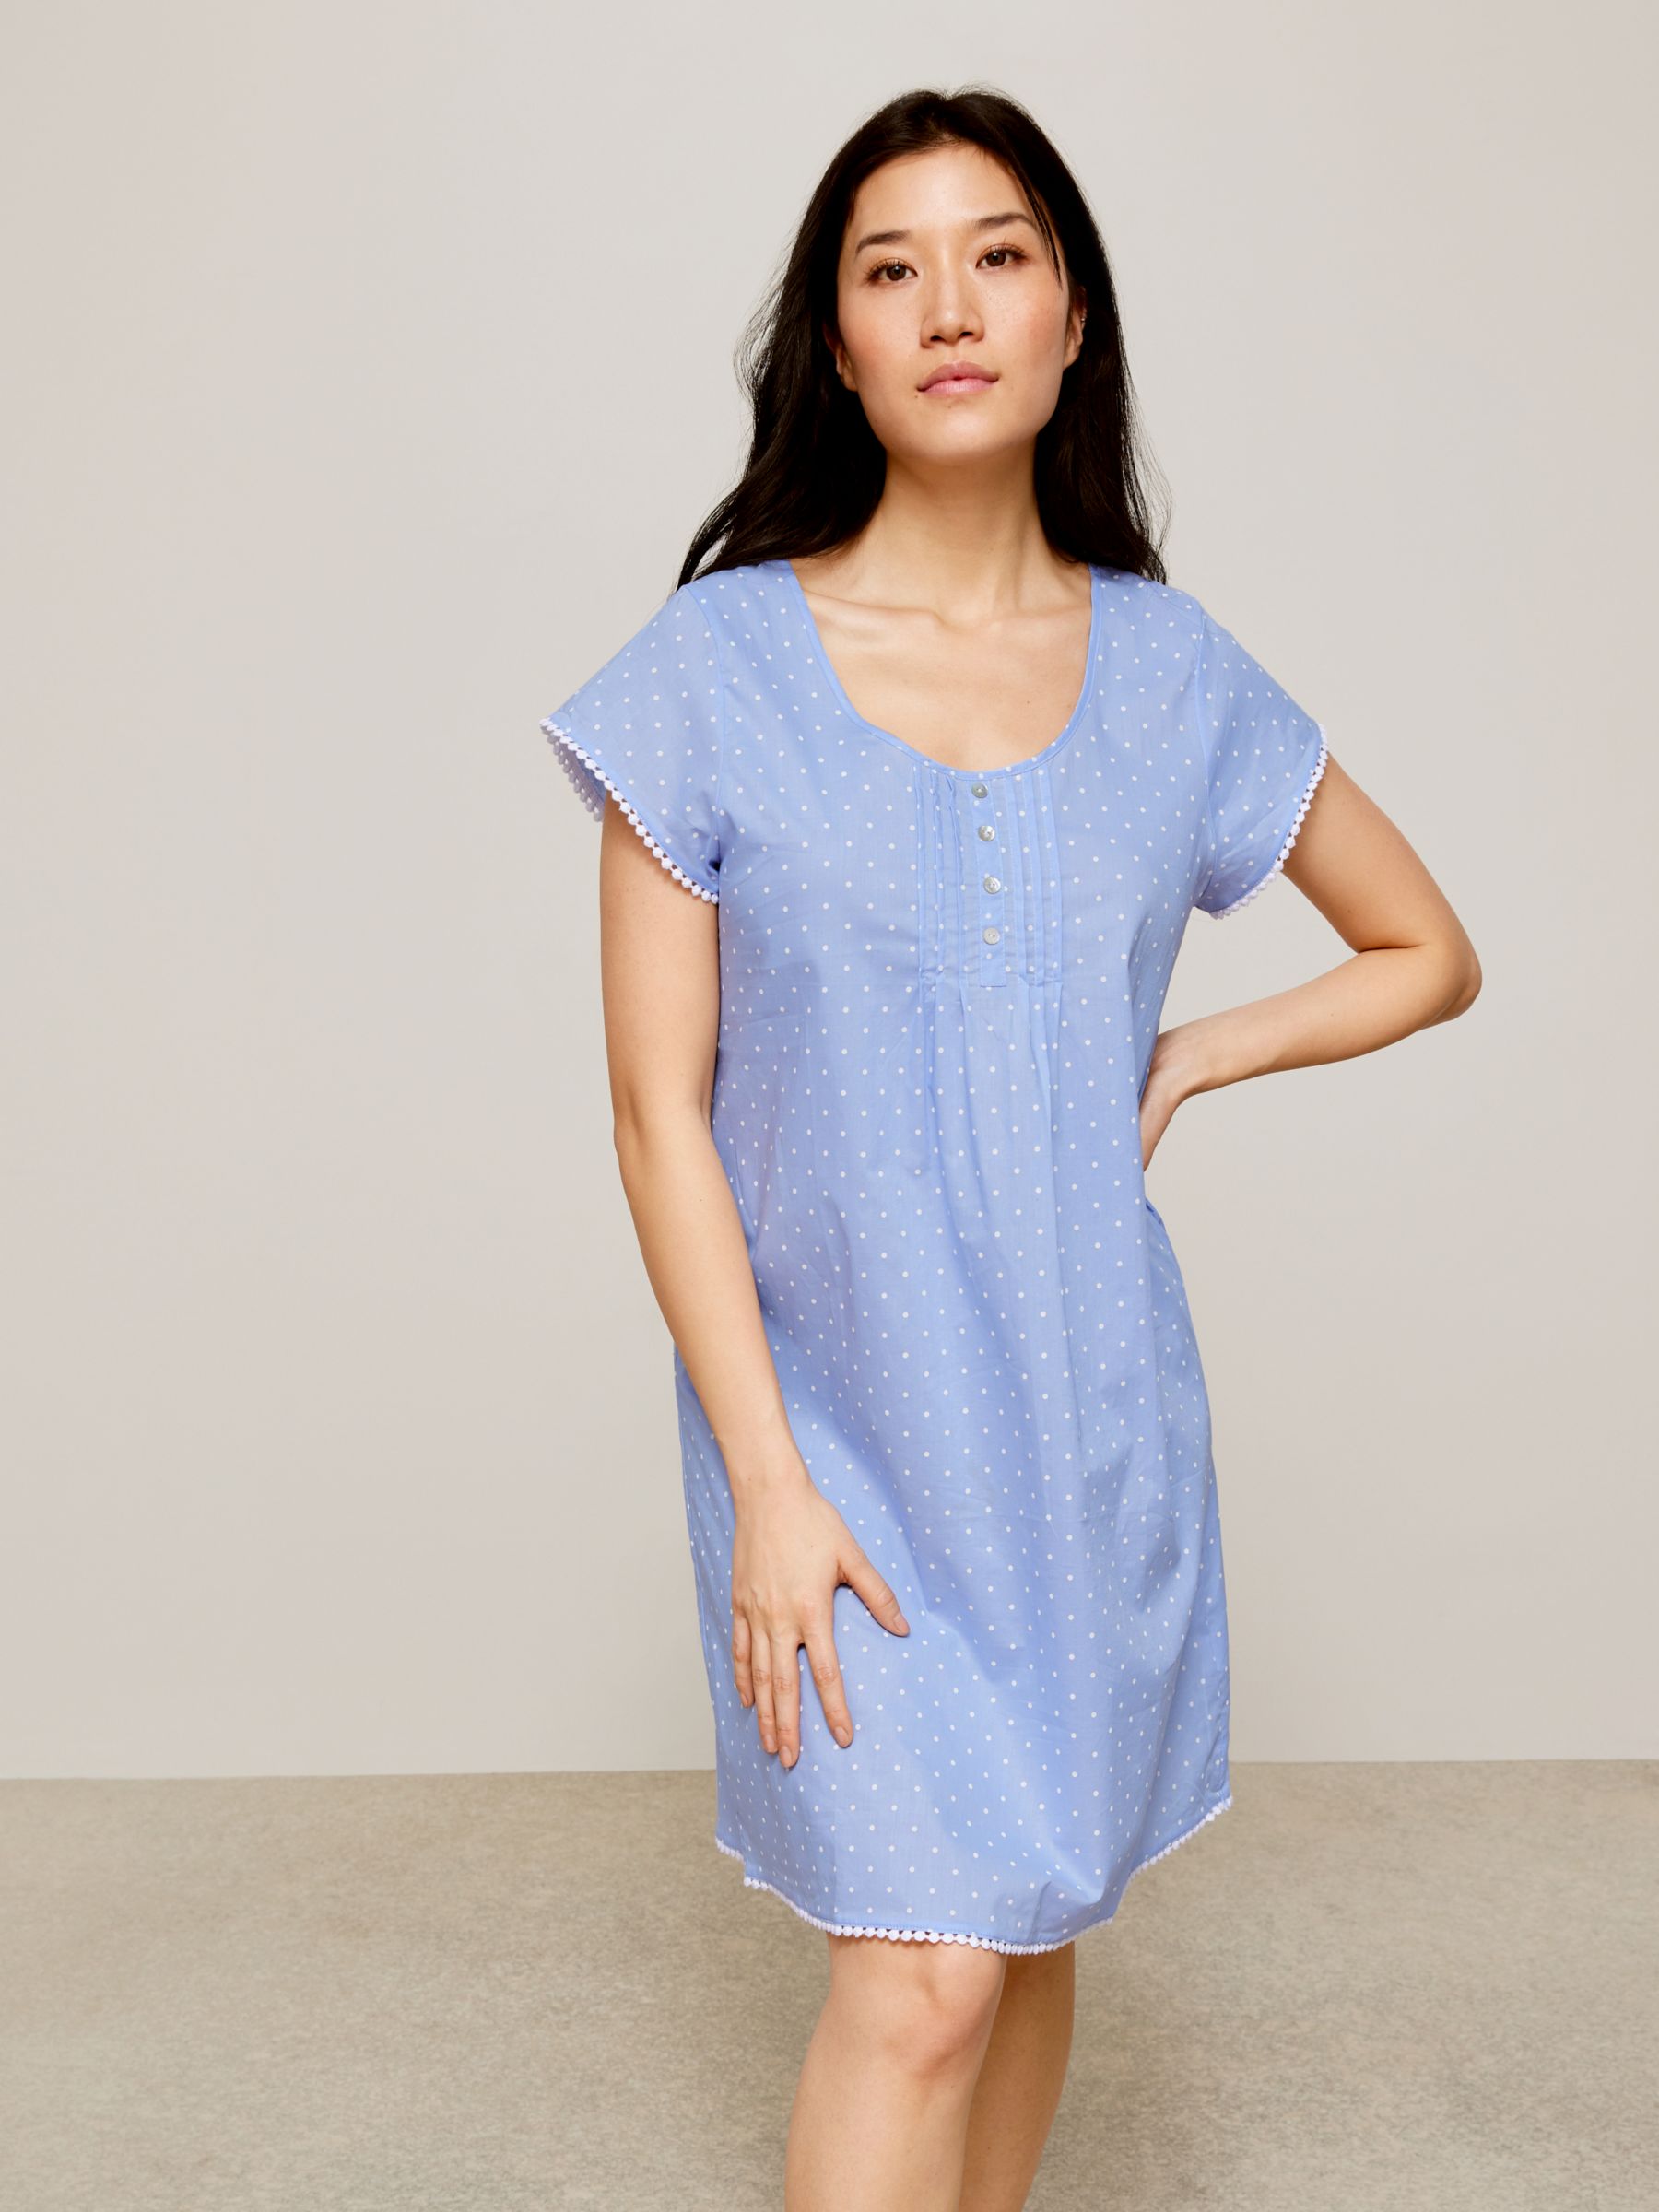 Navy Spot Nightdress with Polka Dot Edging and Bow Detail